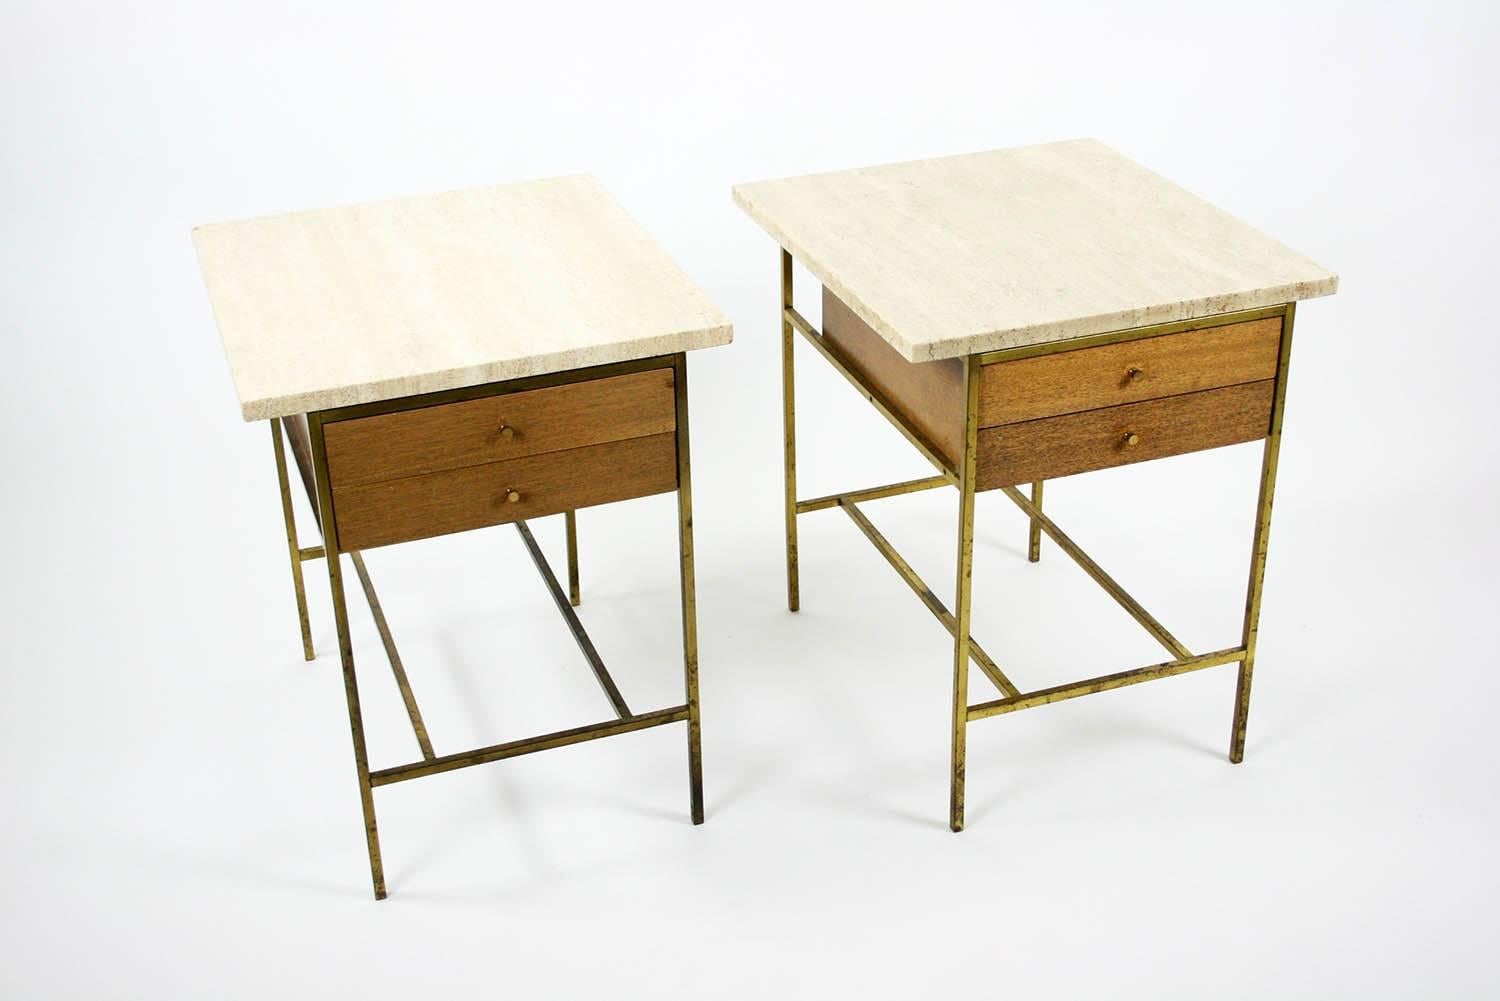 A pair of two-drawer nightstands with travertine tops and flat brass button pulls, Mod. No. 8712, by Paul McCobb for Calvin Group. American, circa 1950.